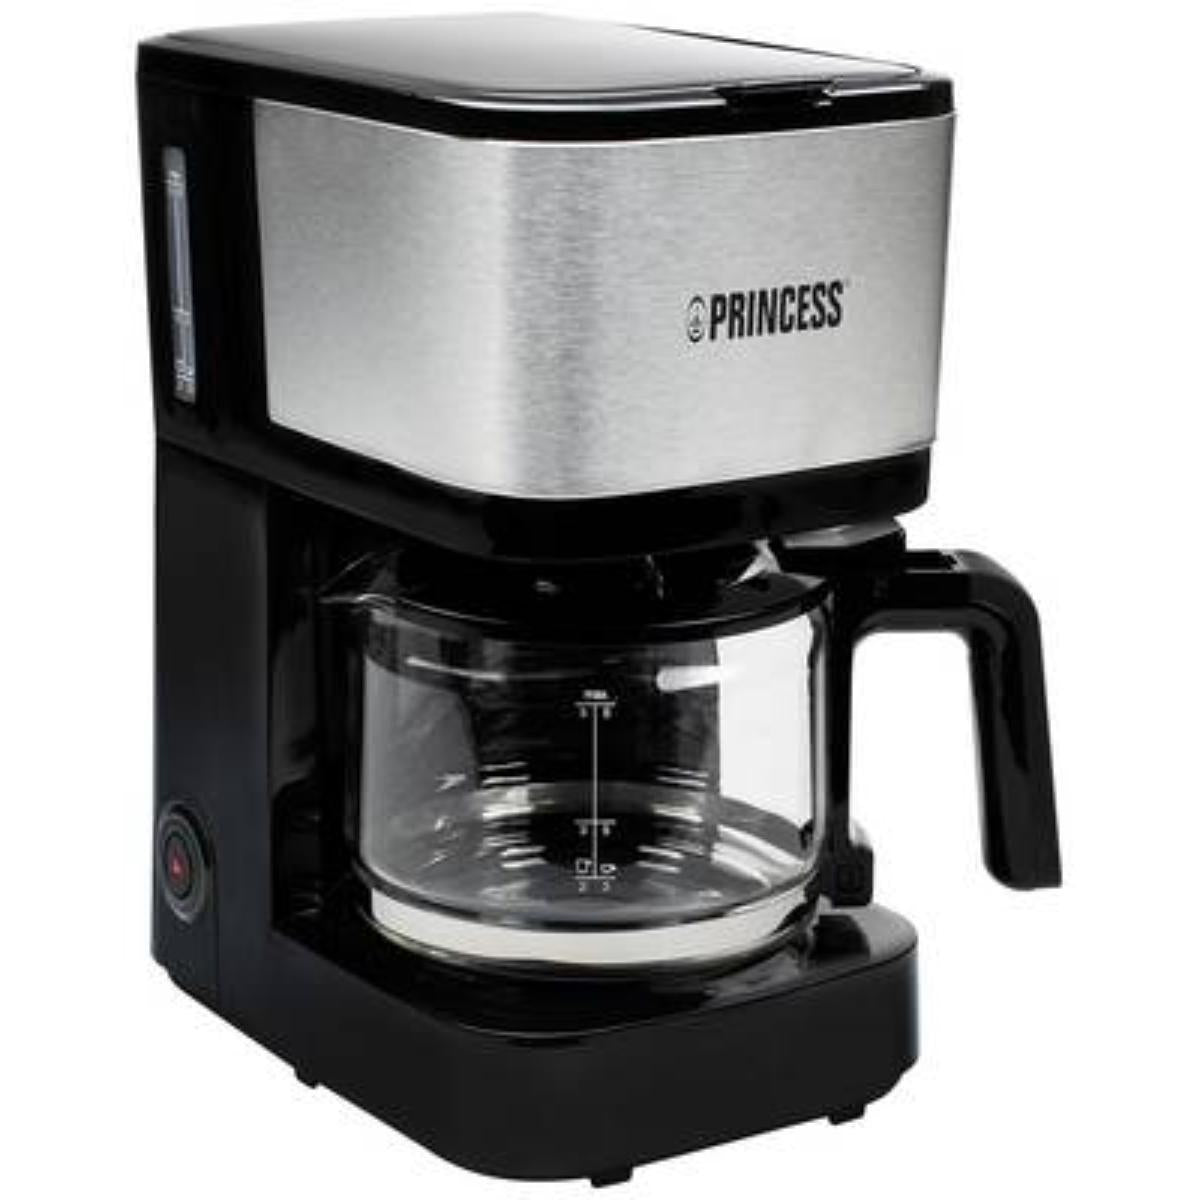 01.246030.01.001/princess filter coffee maker compact 8 volume 0.75 suitable for 8 cup power 600 w 600 / 750ML / American Coffee